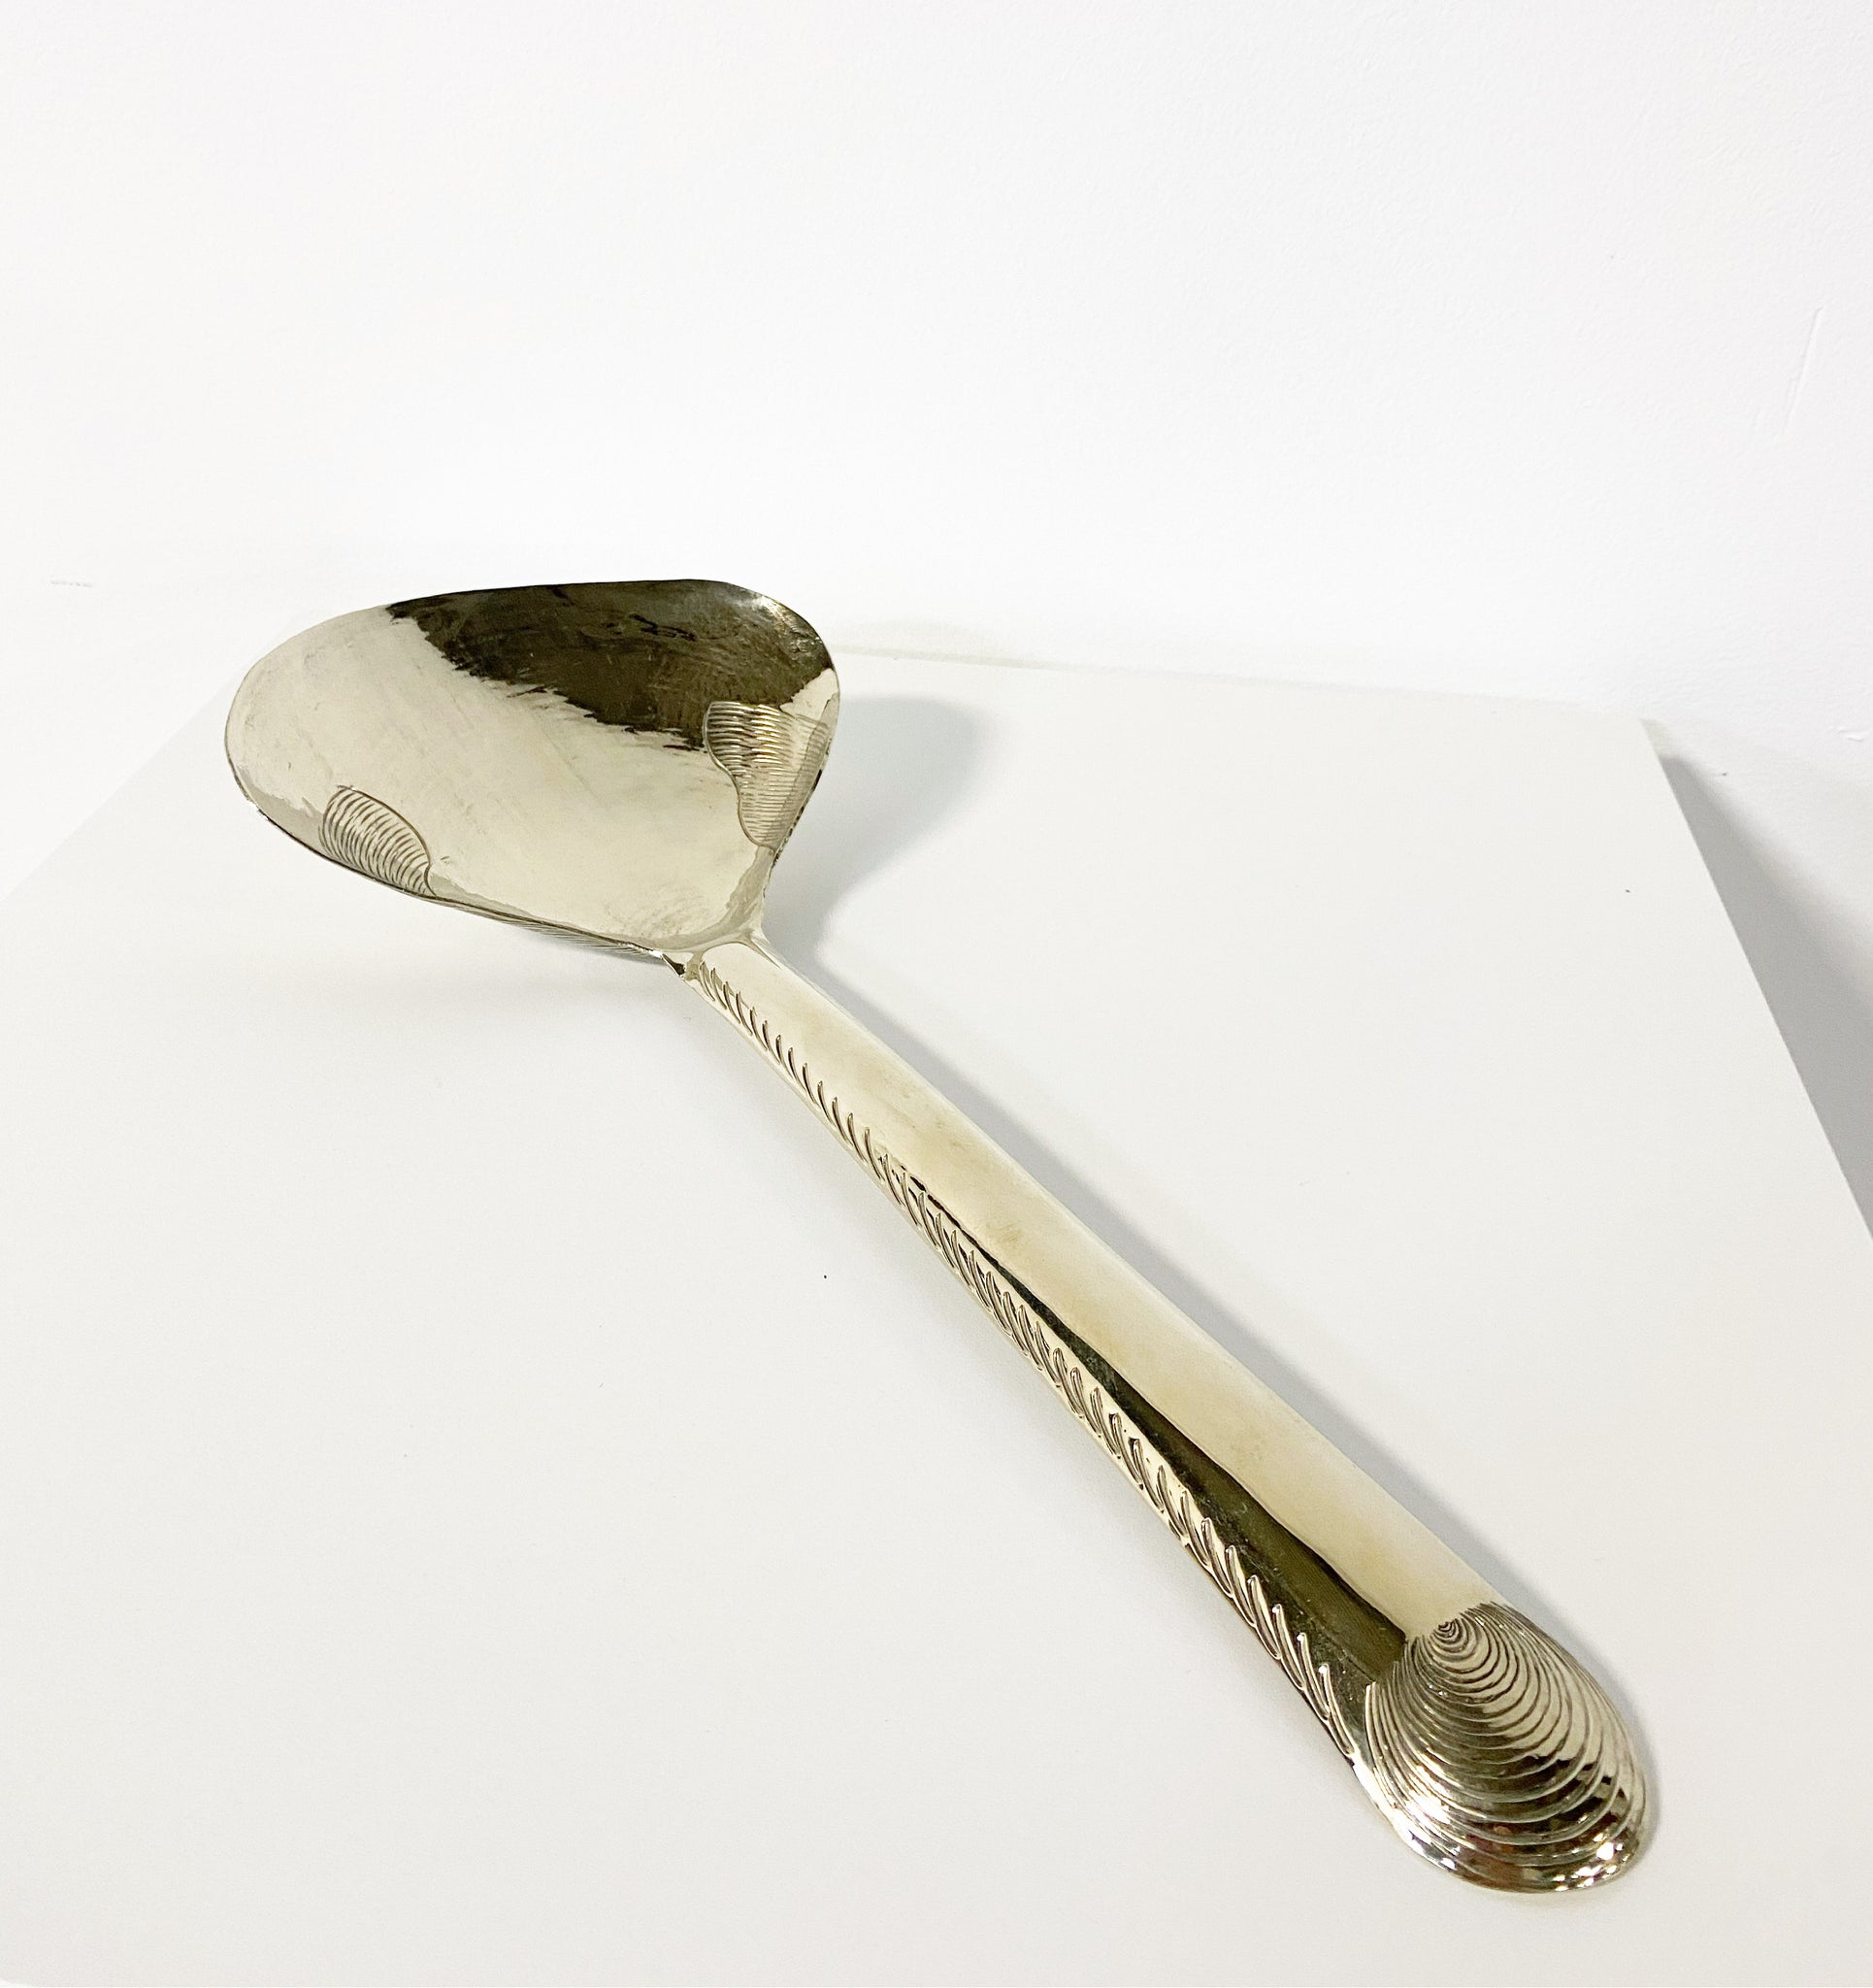 Clam Shell Spoon